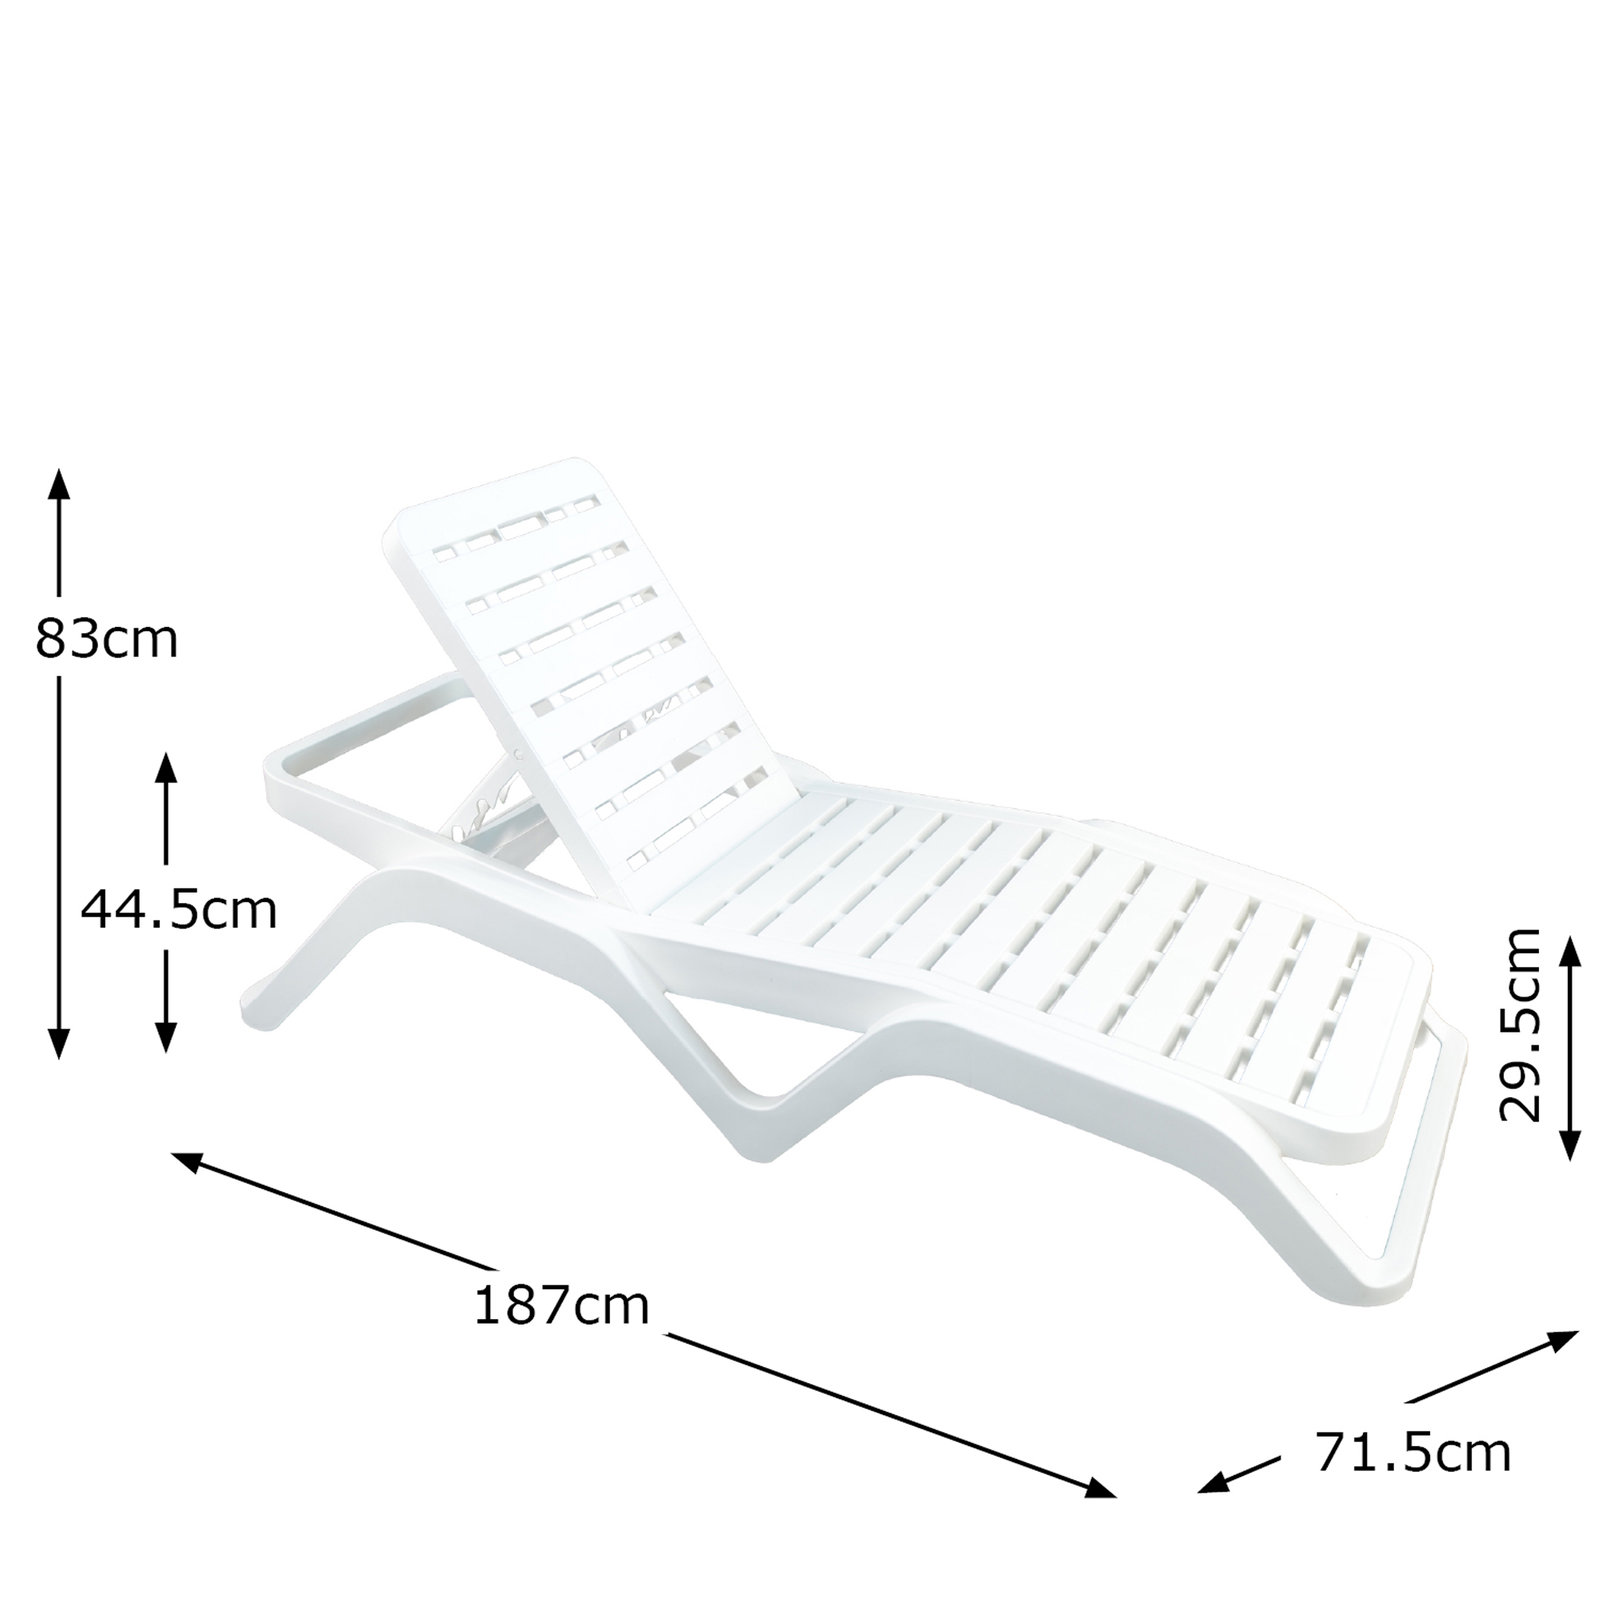 Trabella Scirocco Sun Lounger pack of 2 in White Sun Loungers Trabella   